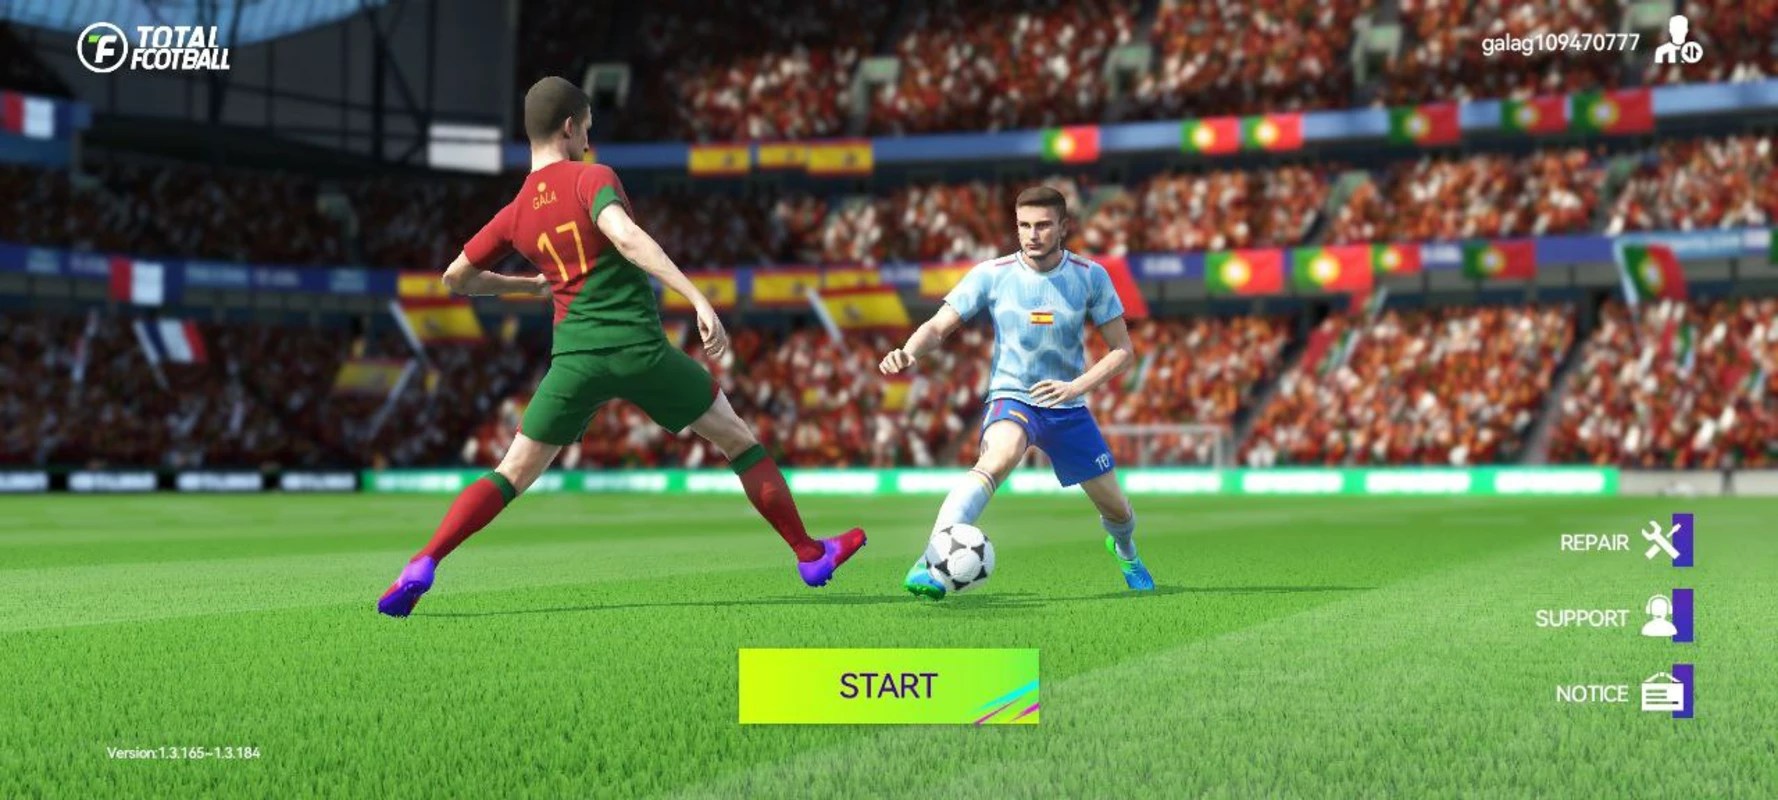 Total Football (Europe) 1.9.108 APK feature